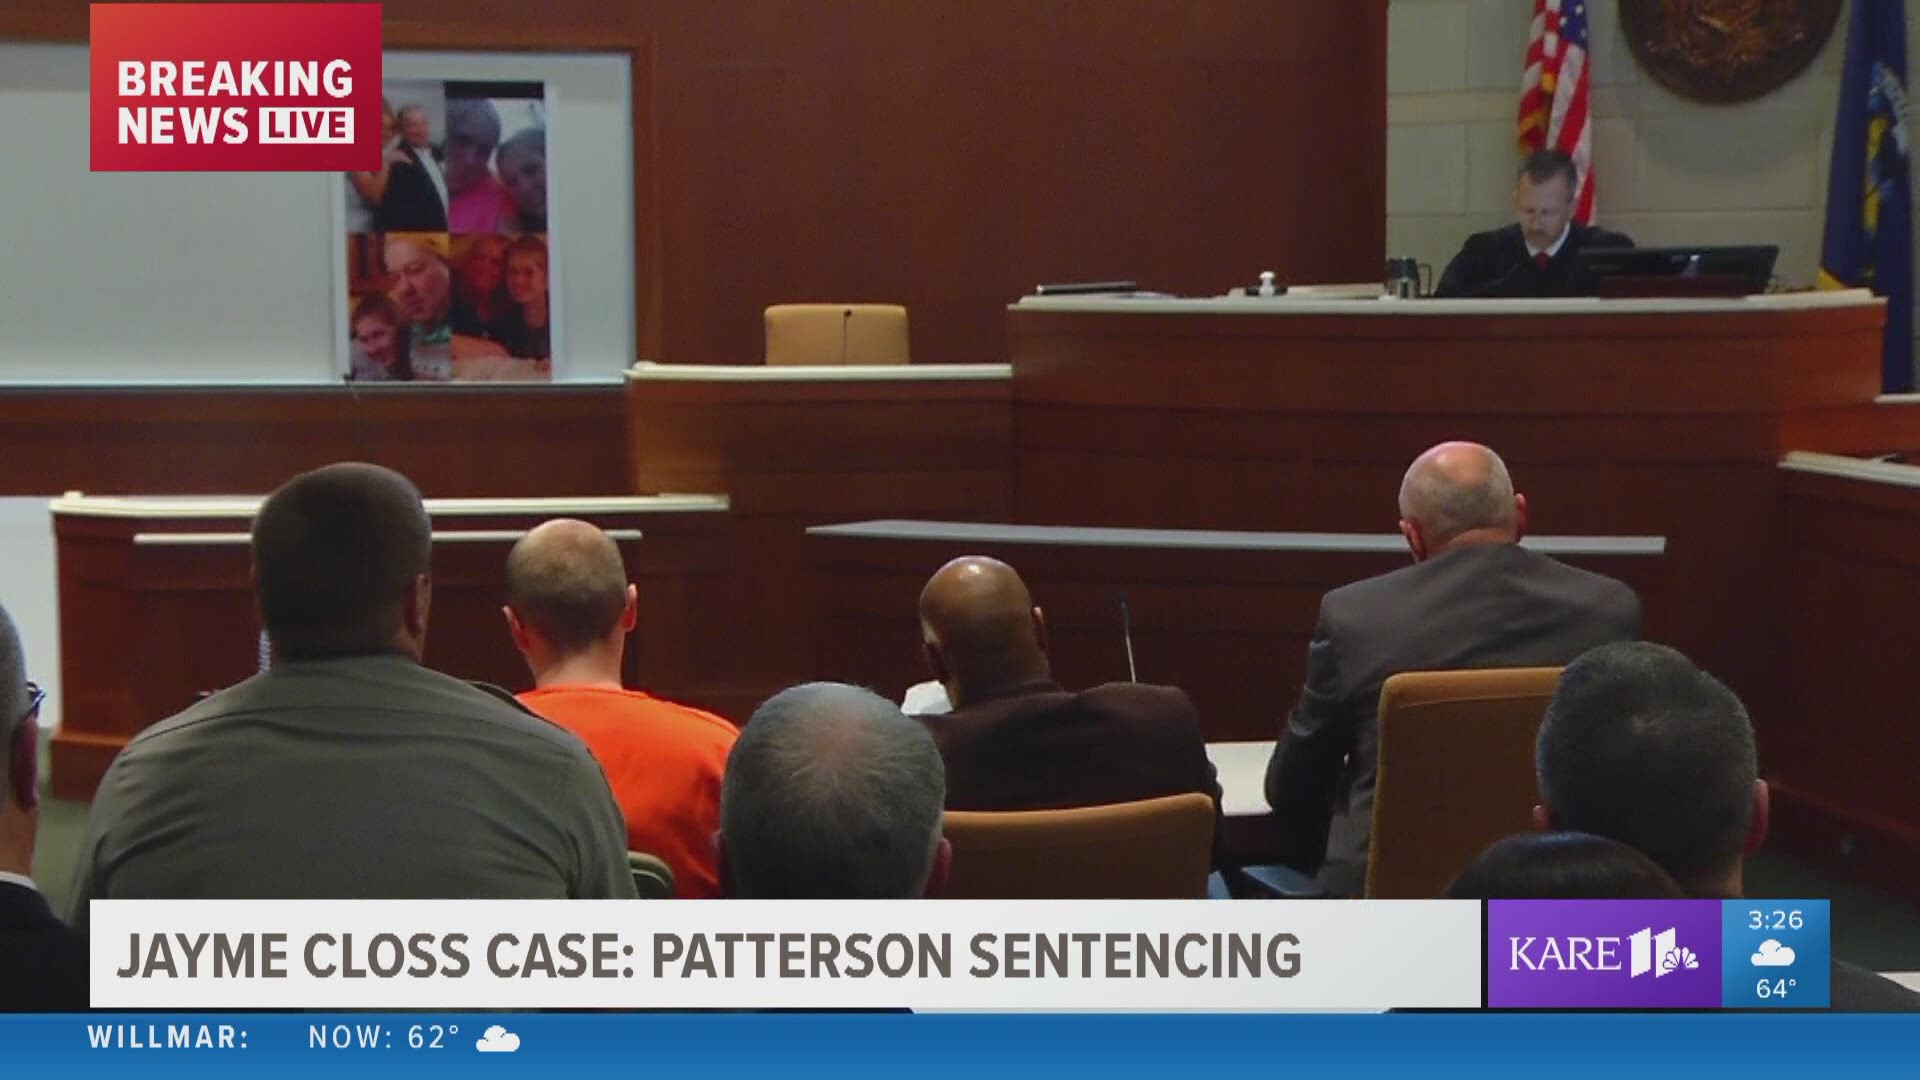 The judge said the overriding factor in his decision was the safety of the public. "You are the embodiment of evil," he said to Jake Patterson. "You are one of the most dangerous men to ever walk on this planet."